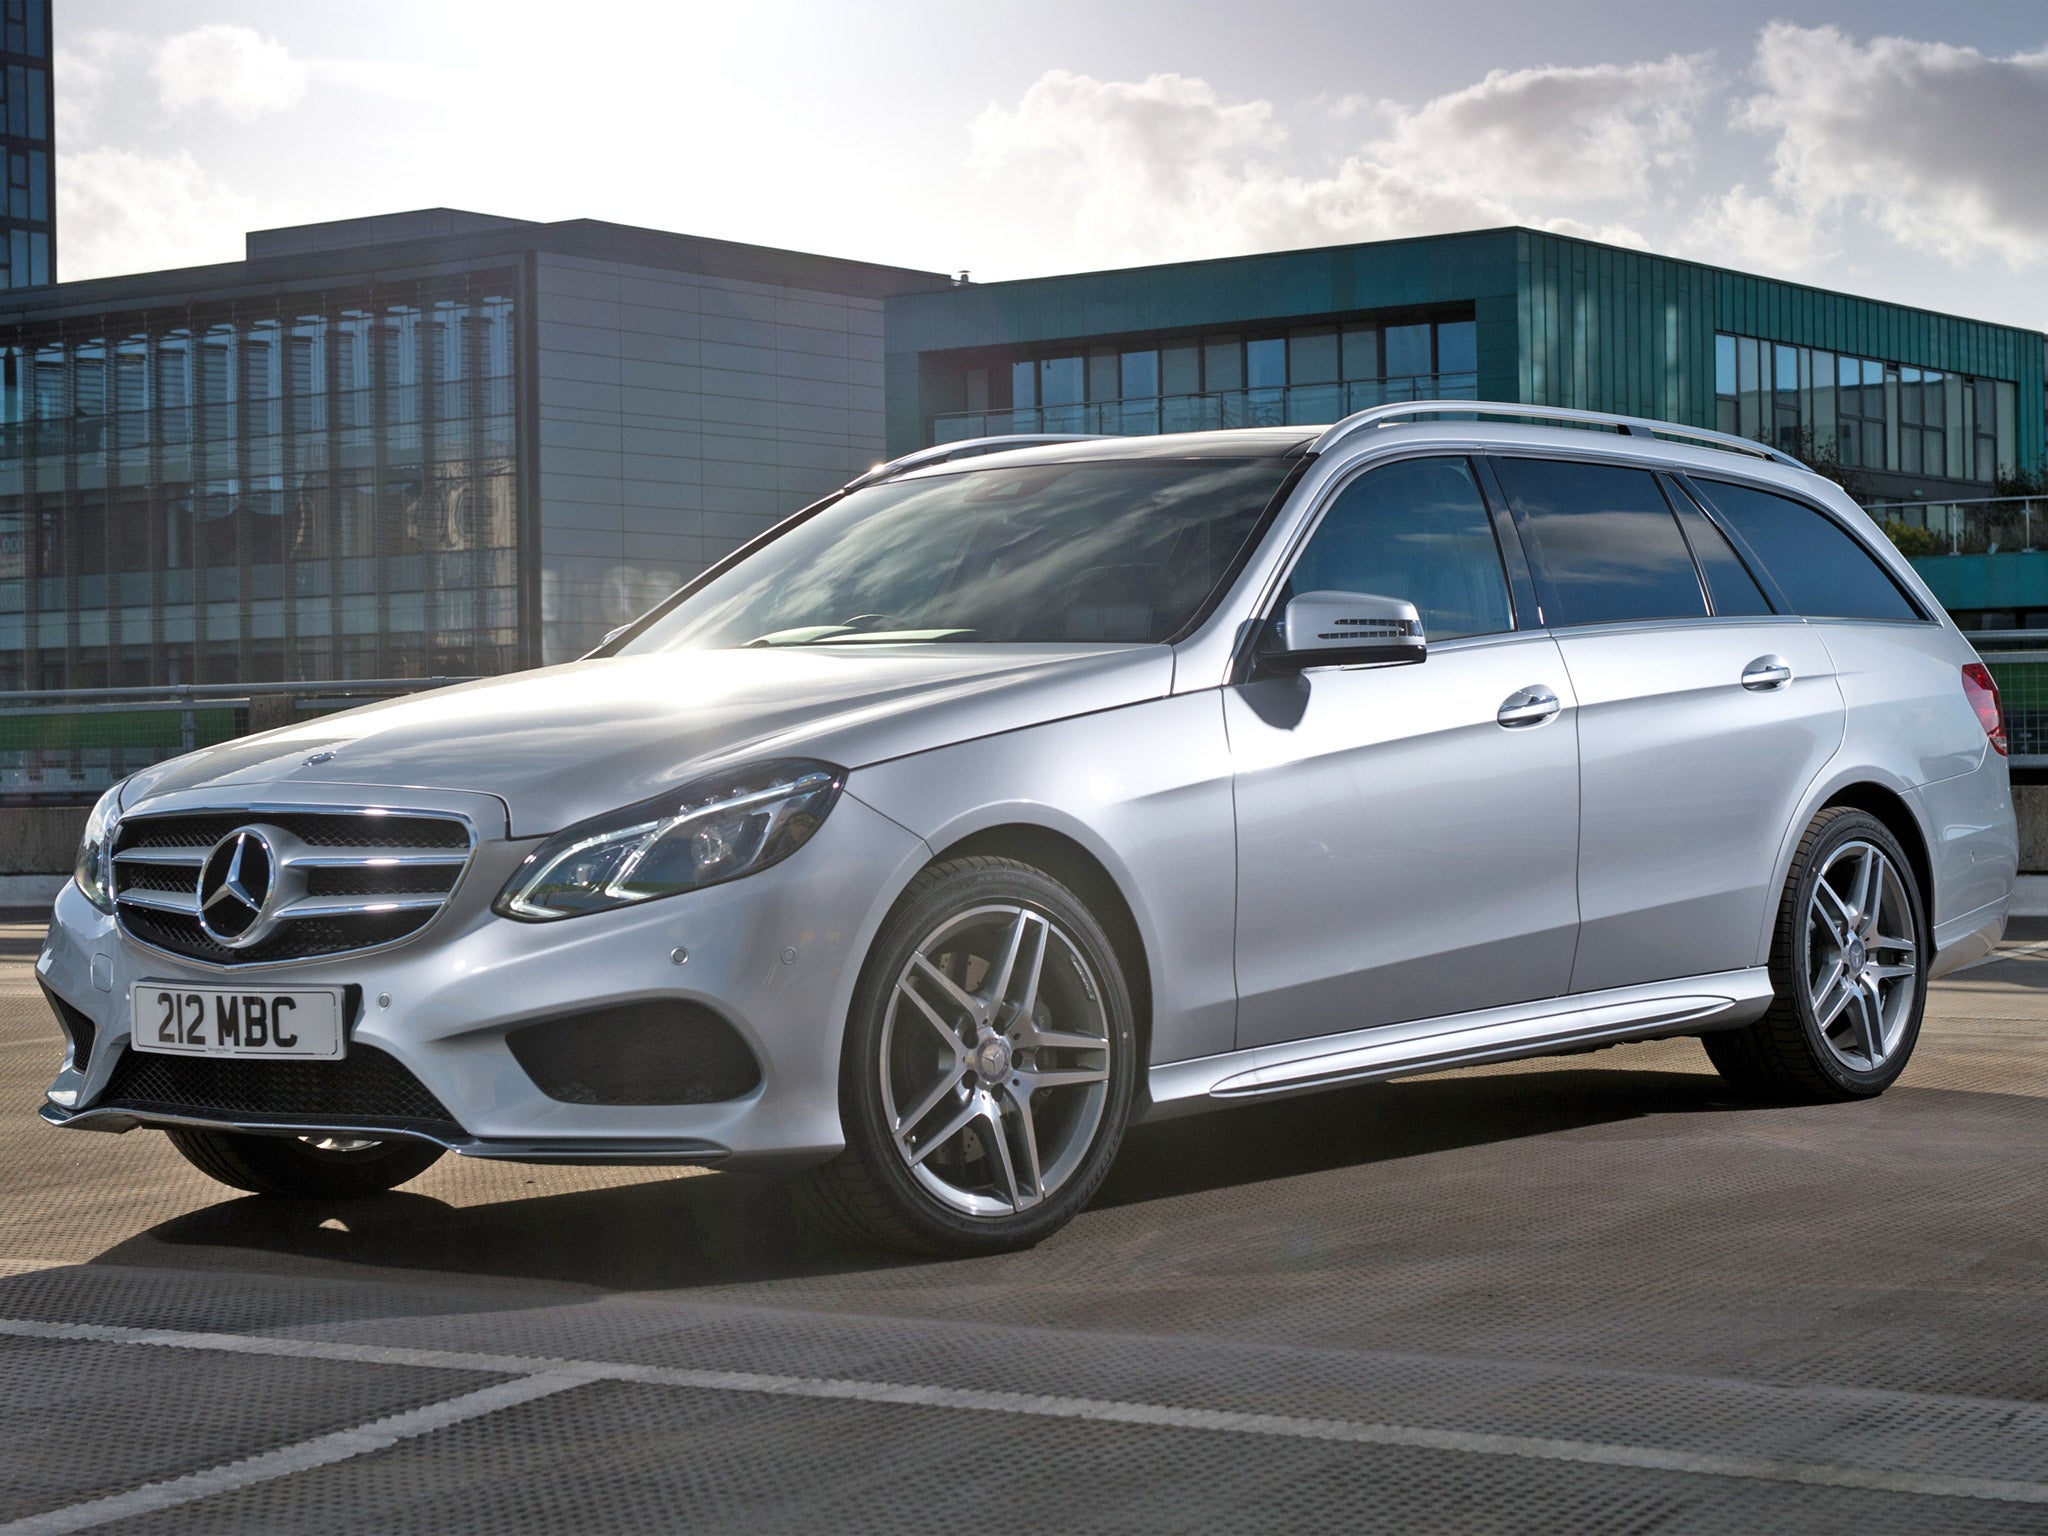 Impeccable touring manners: the new Mercedes E-Class Estate